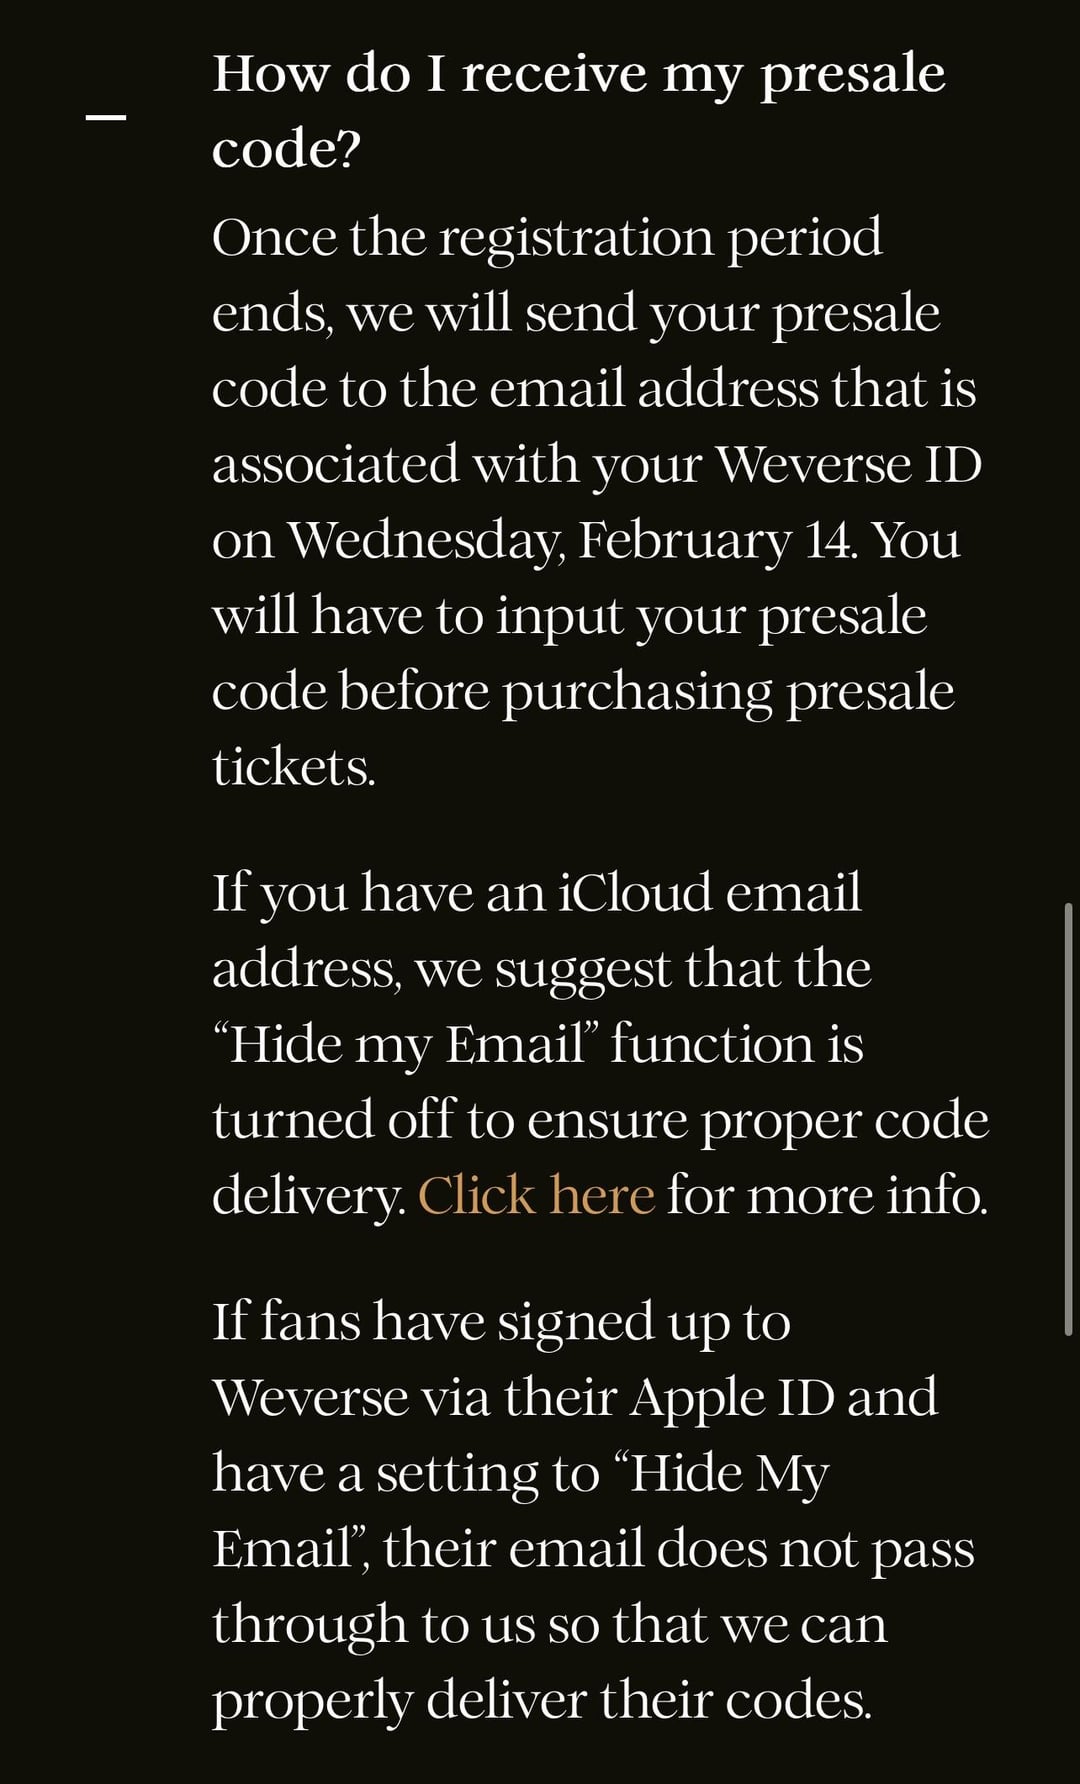 Presale answers to some questions I saw about the code.